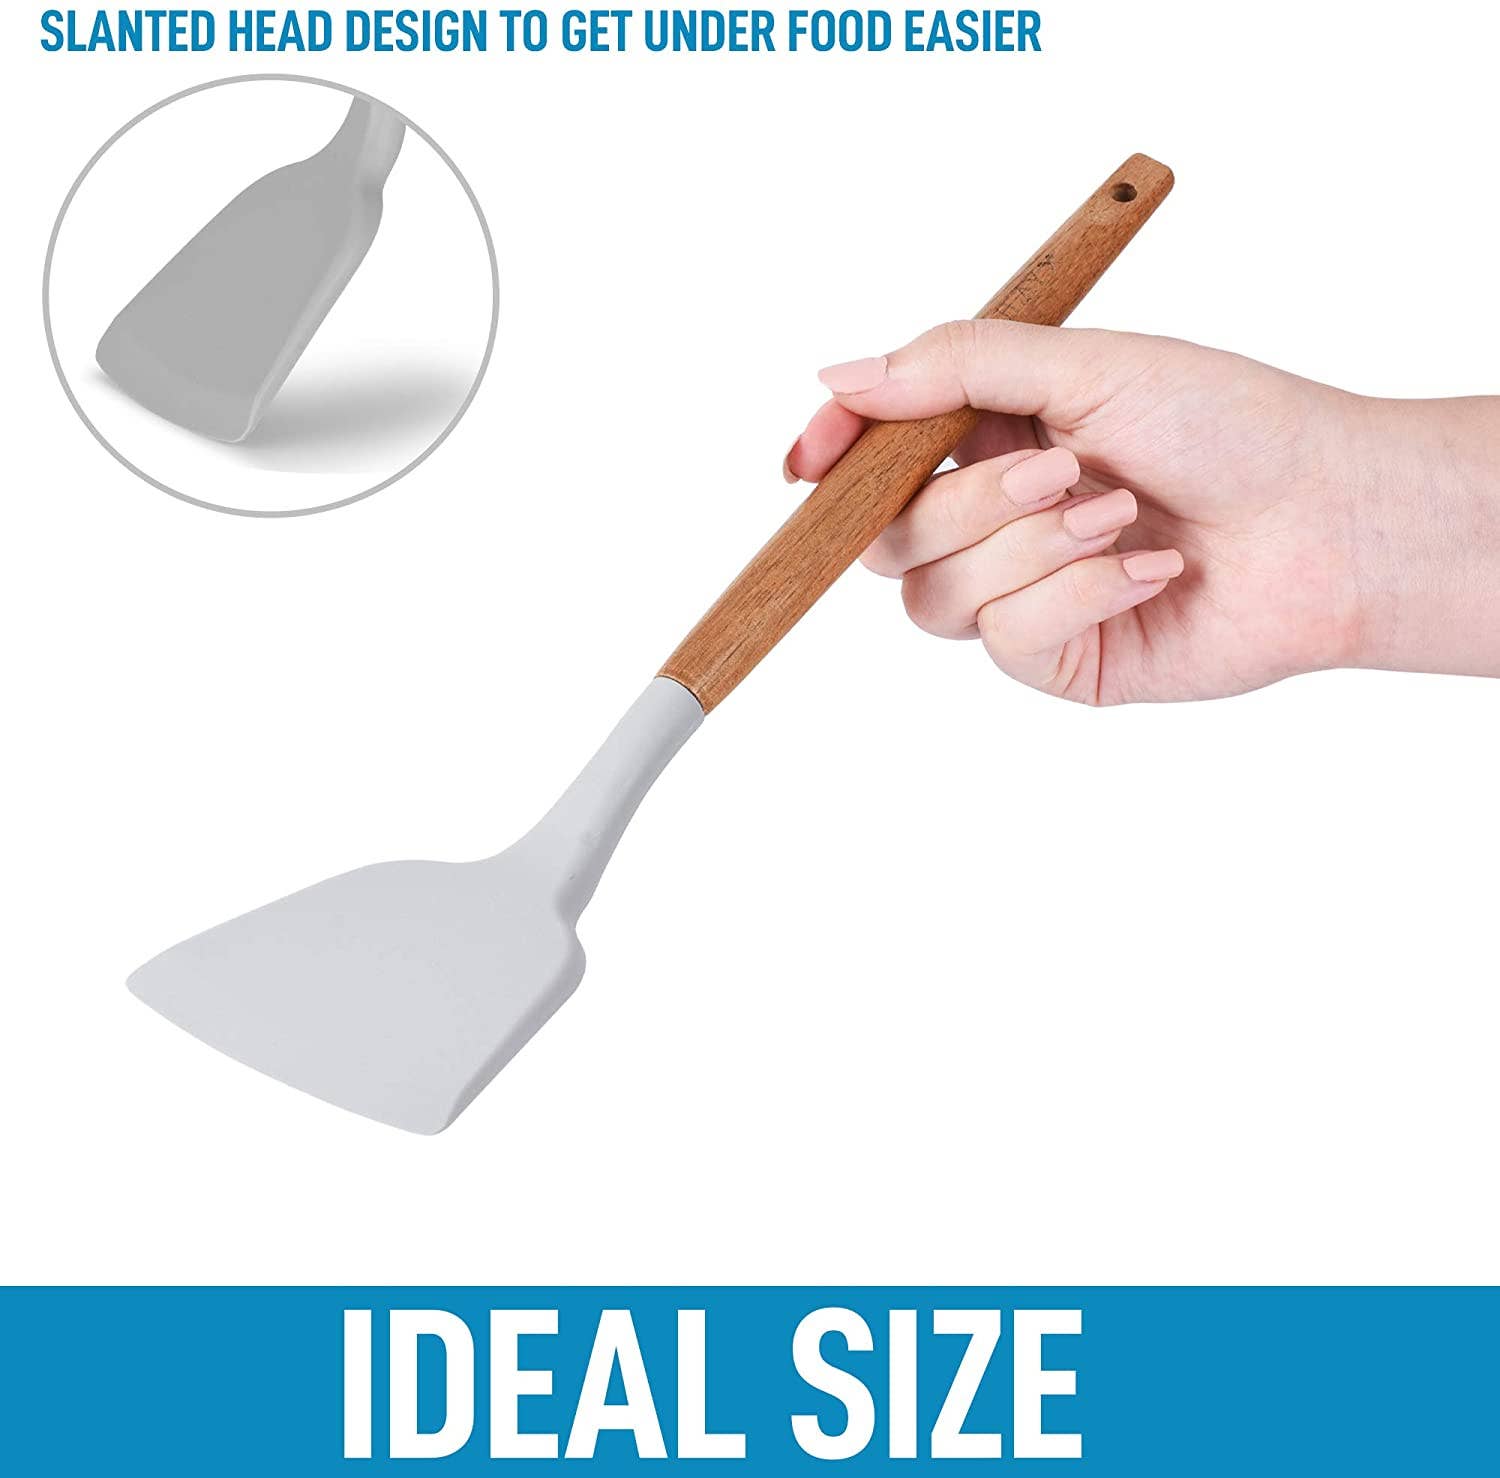 The spatula's slanted edge lets you get under food easier.